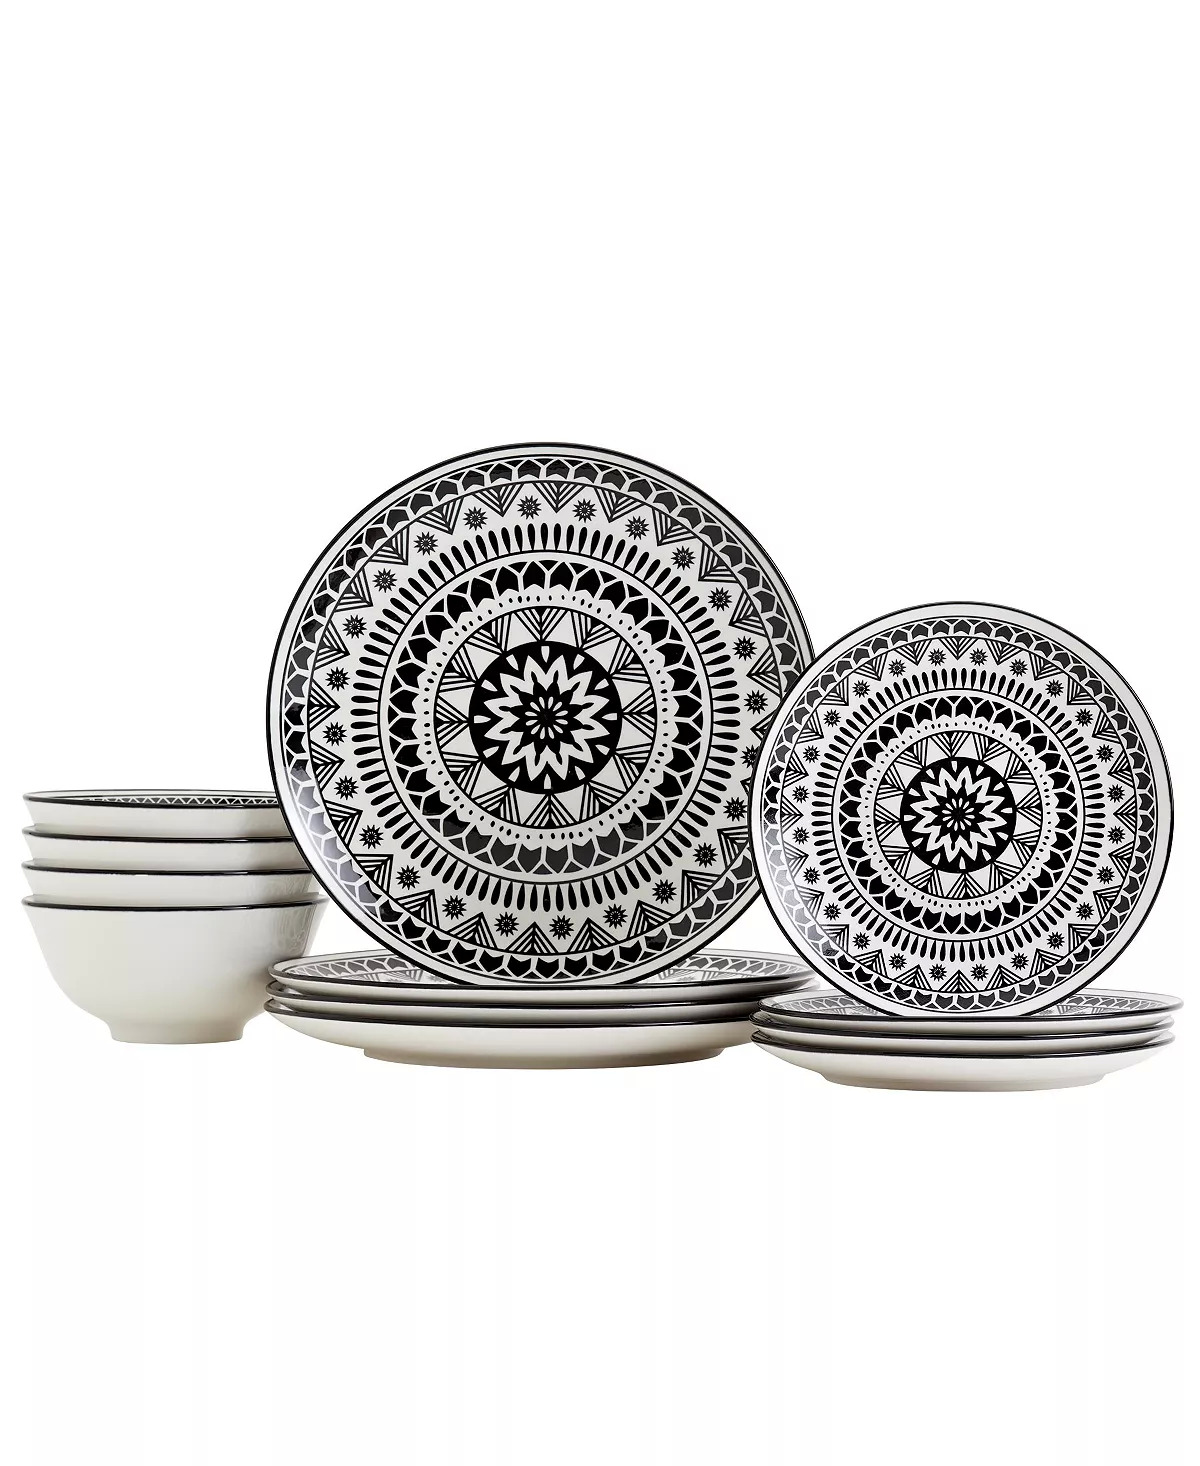 12-Piece Tabletops Unlimited Dinnerware Set (Various Designs, Service for 4) $26.34 + Free Shipping